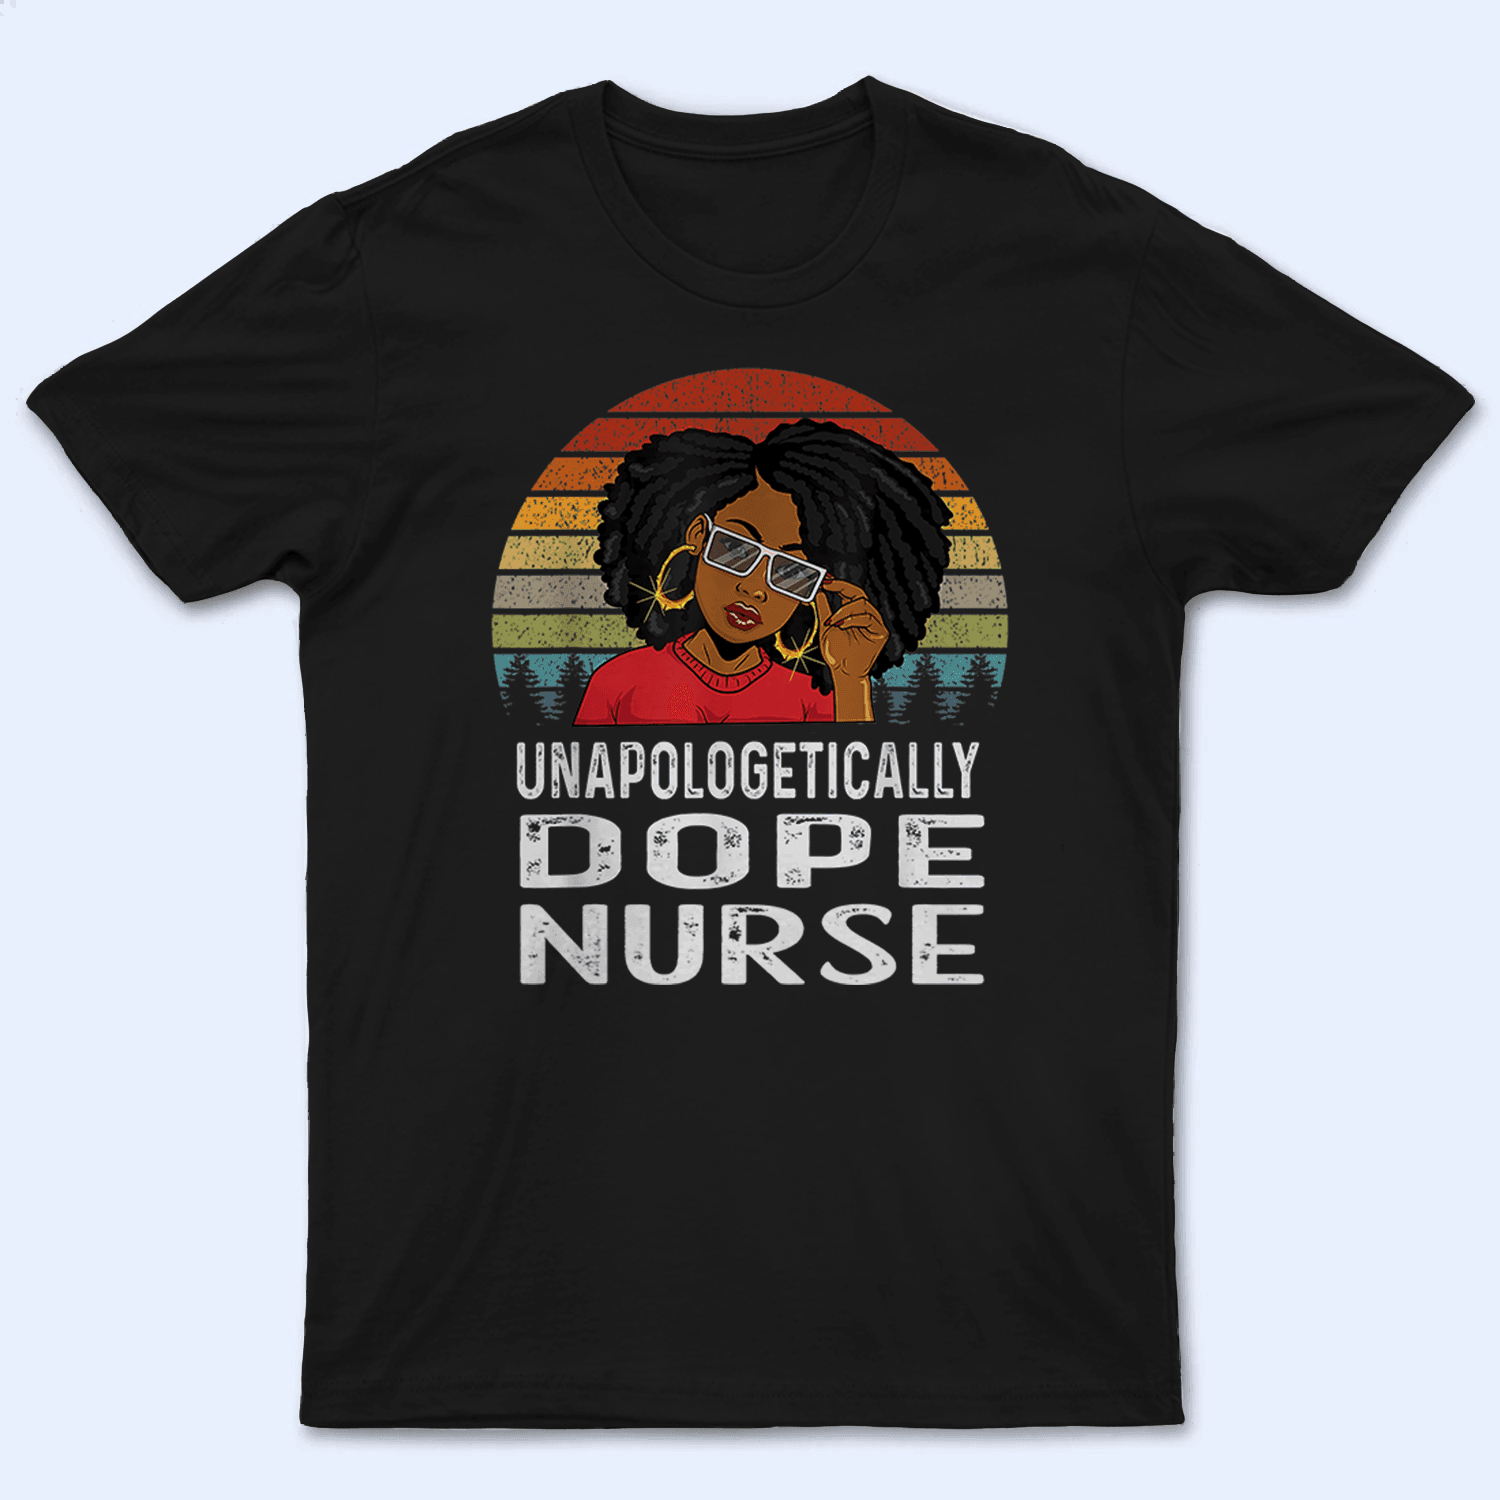 Unapologetically Dope Nurse - Personalized Custom T Shirt - Birthday, Loving, Funny Gift for Nurse, CNA, Healthcare, Registered RN - Suzitee Store